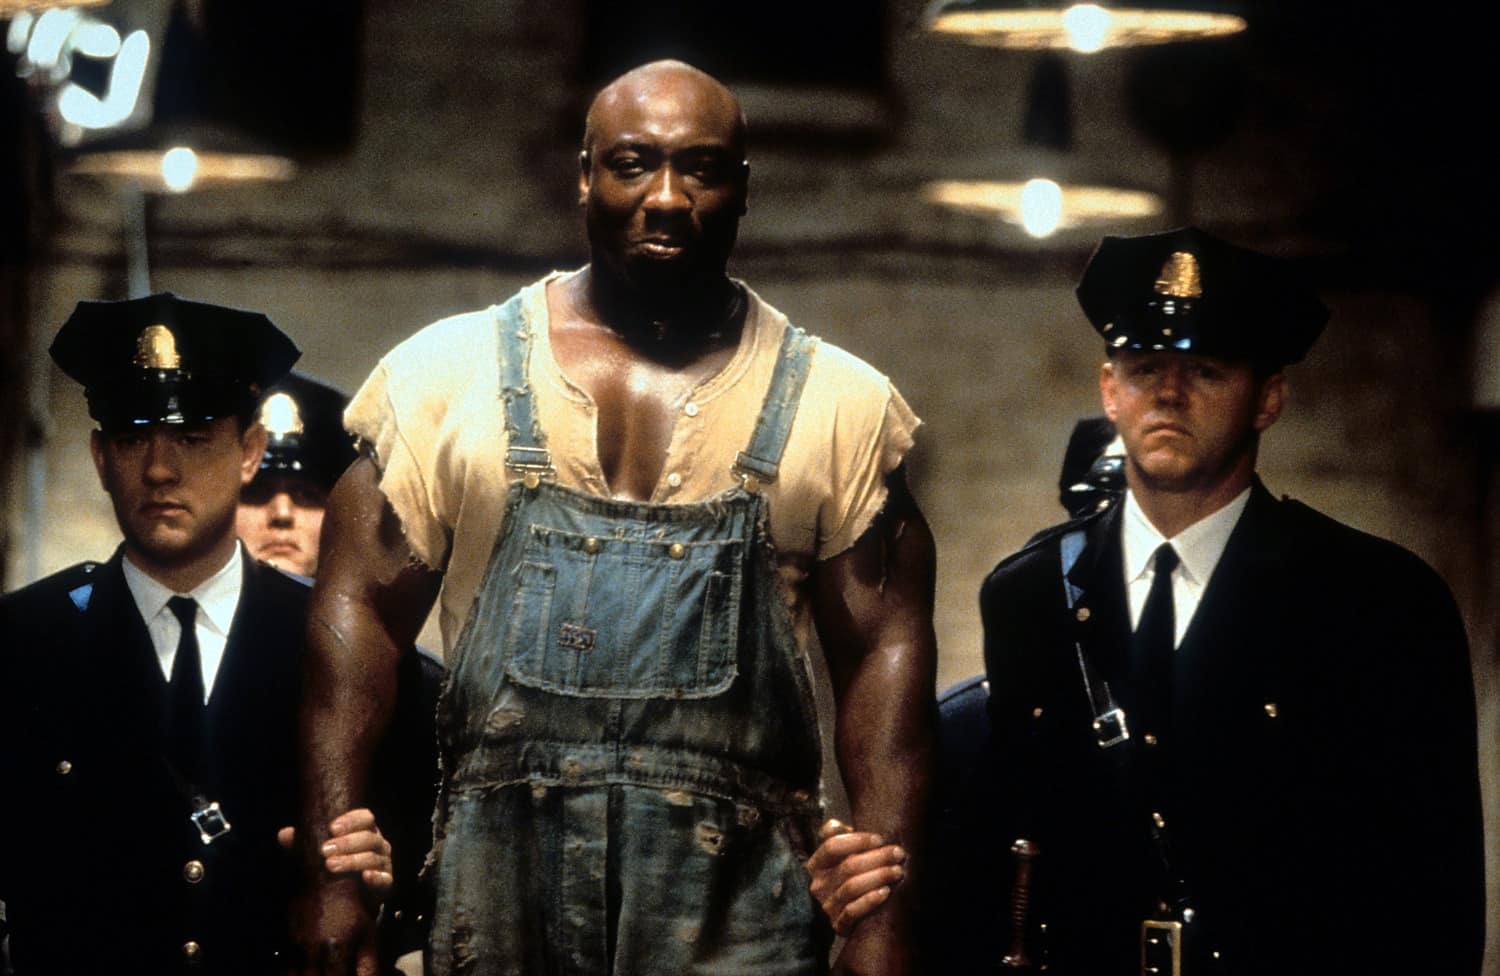 Paul Edgecomb, John Coffey, and Dean Stanton in this image from Warner Bros